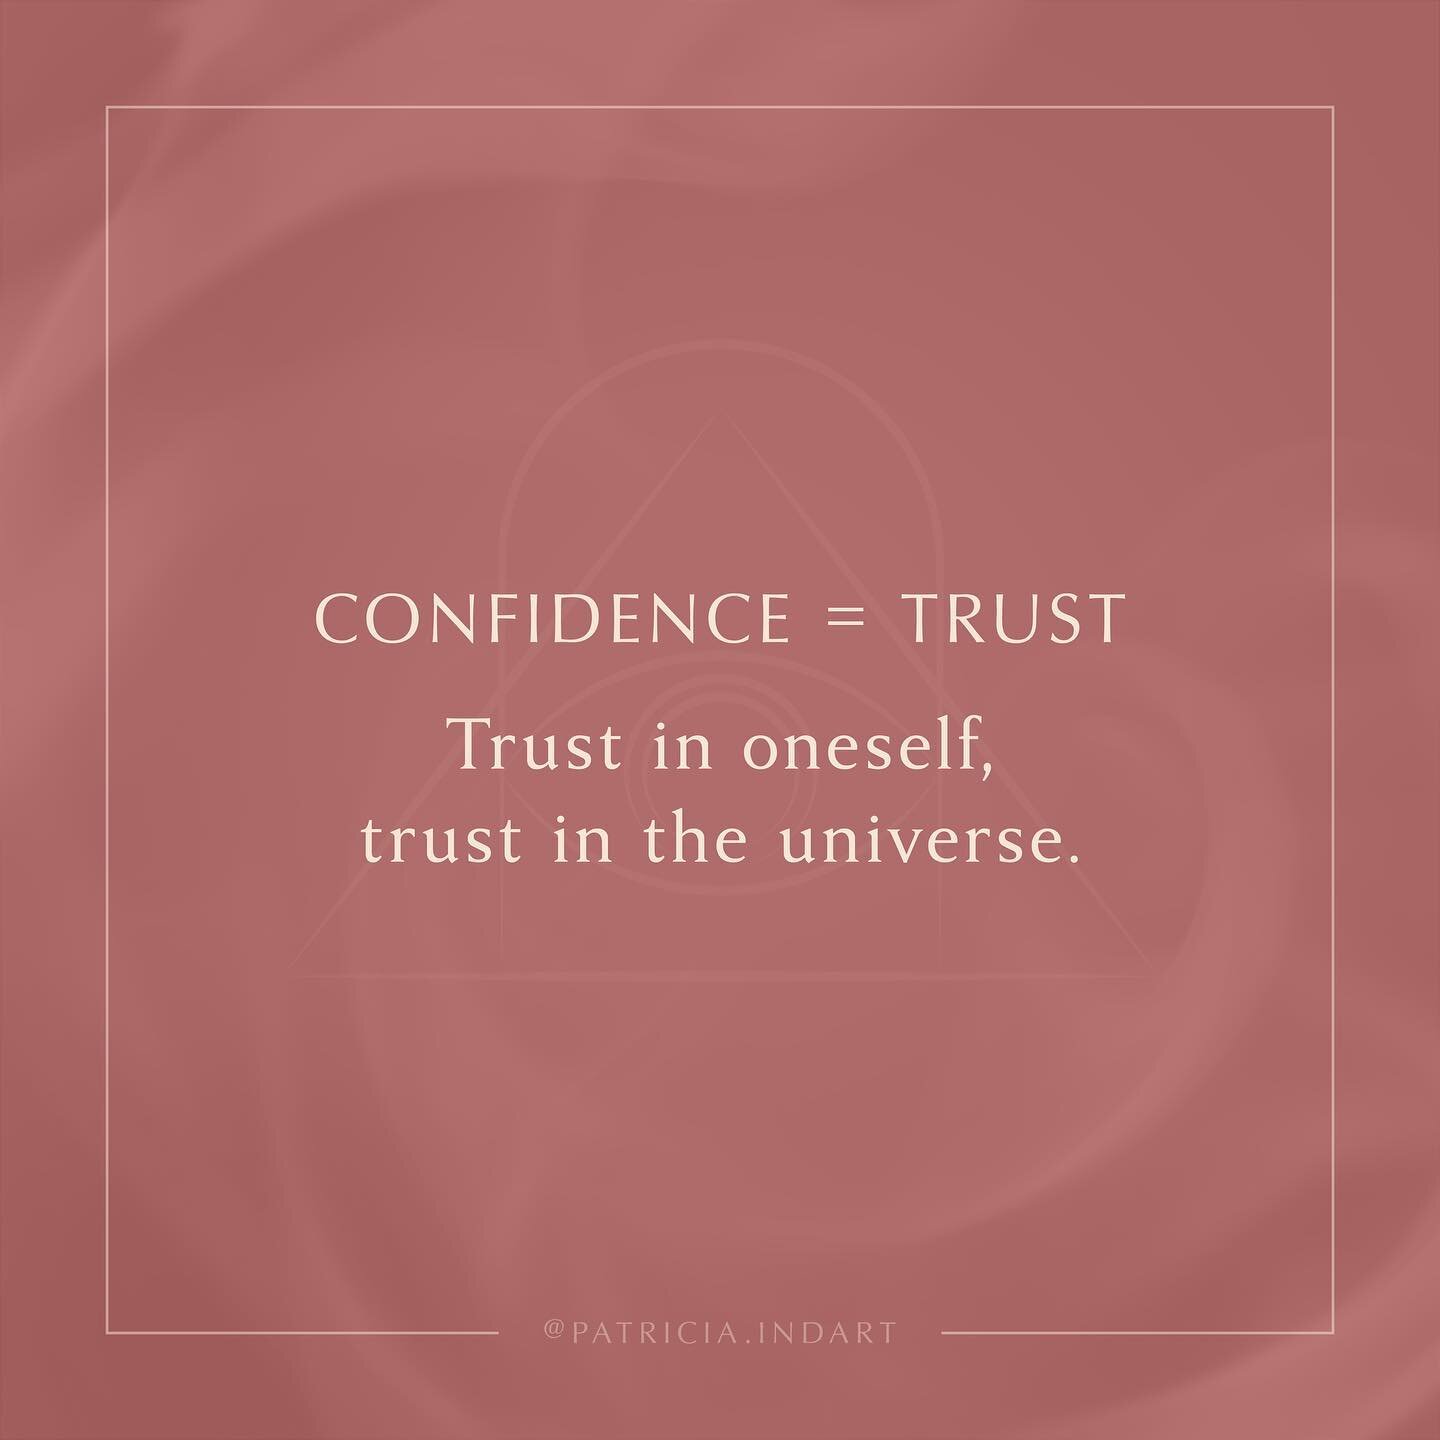 No need to justify. No need to compare. No need to &ldquo;fake it &lsquo;till you make it&rdquo;. Confidence simply comes from trust. So, trust in yourself and the universe&mdash;they are one and the same&mdash;and that trust, that trust you choose t